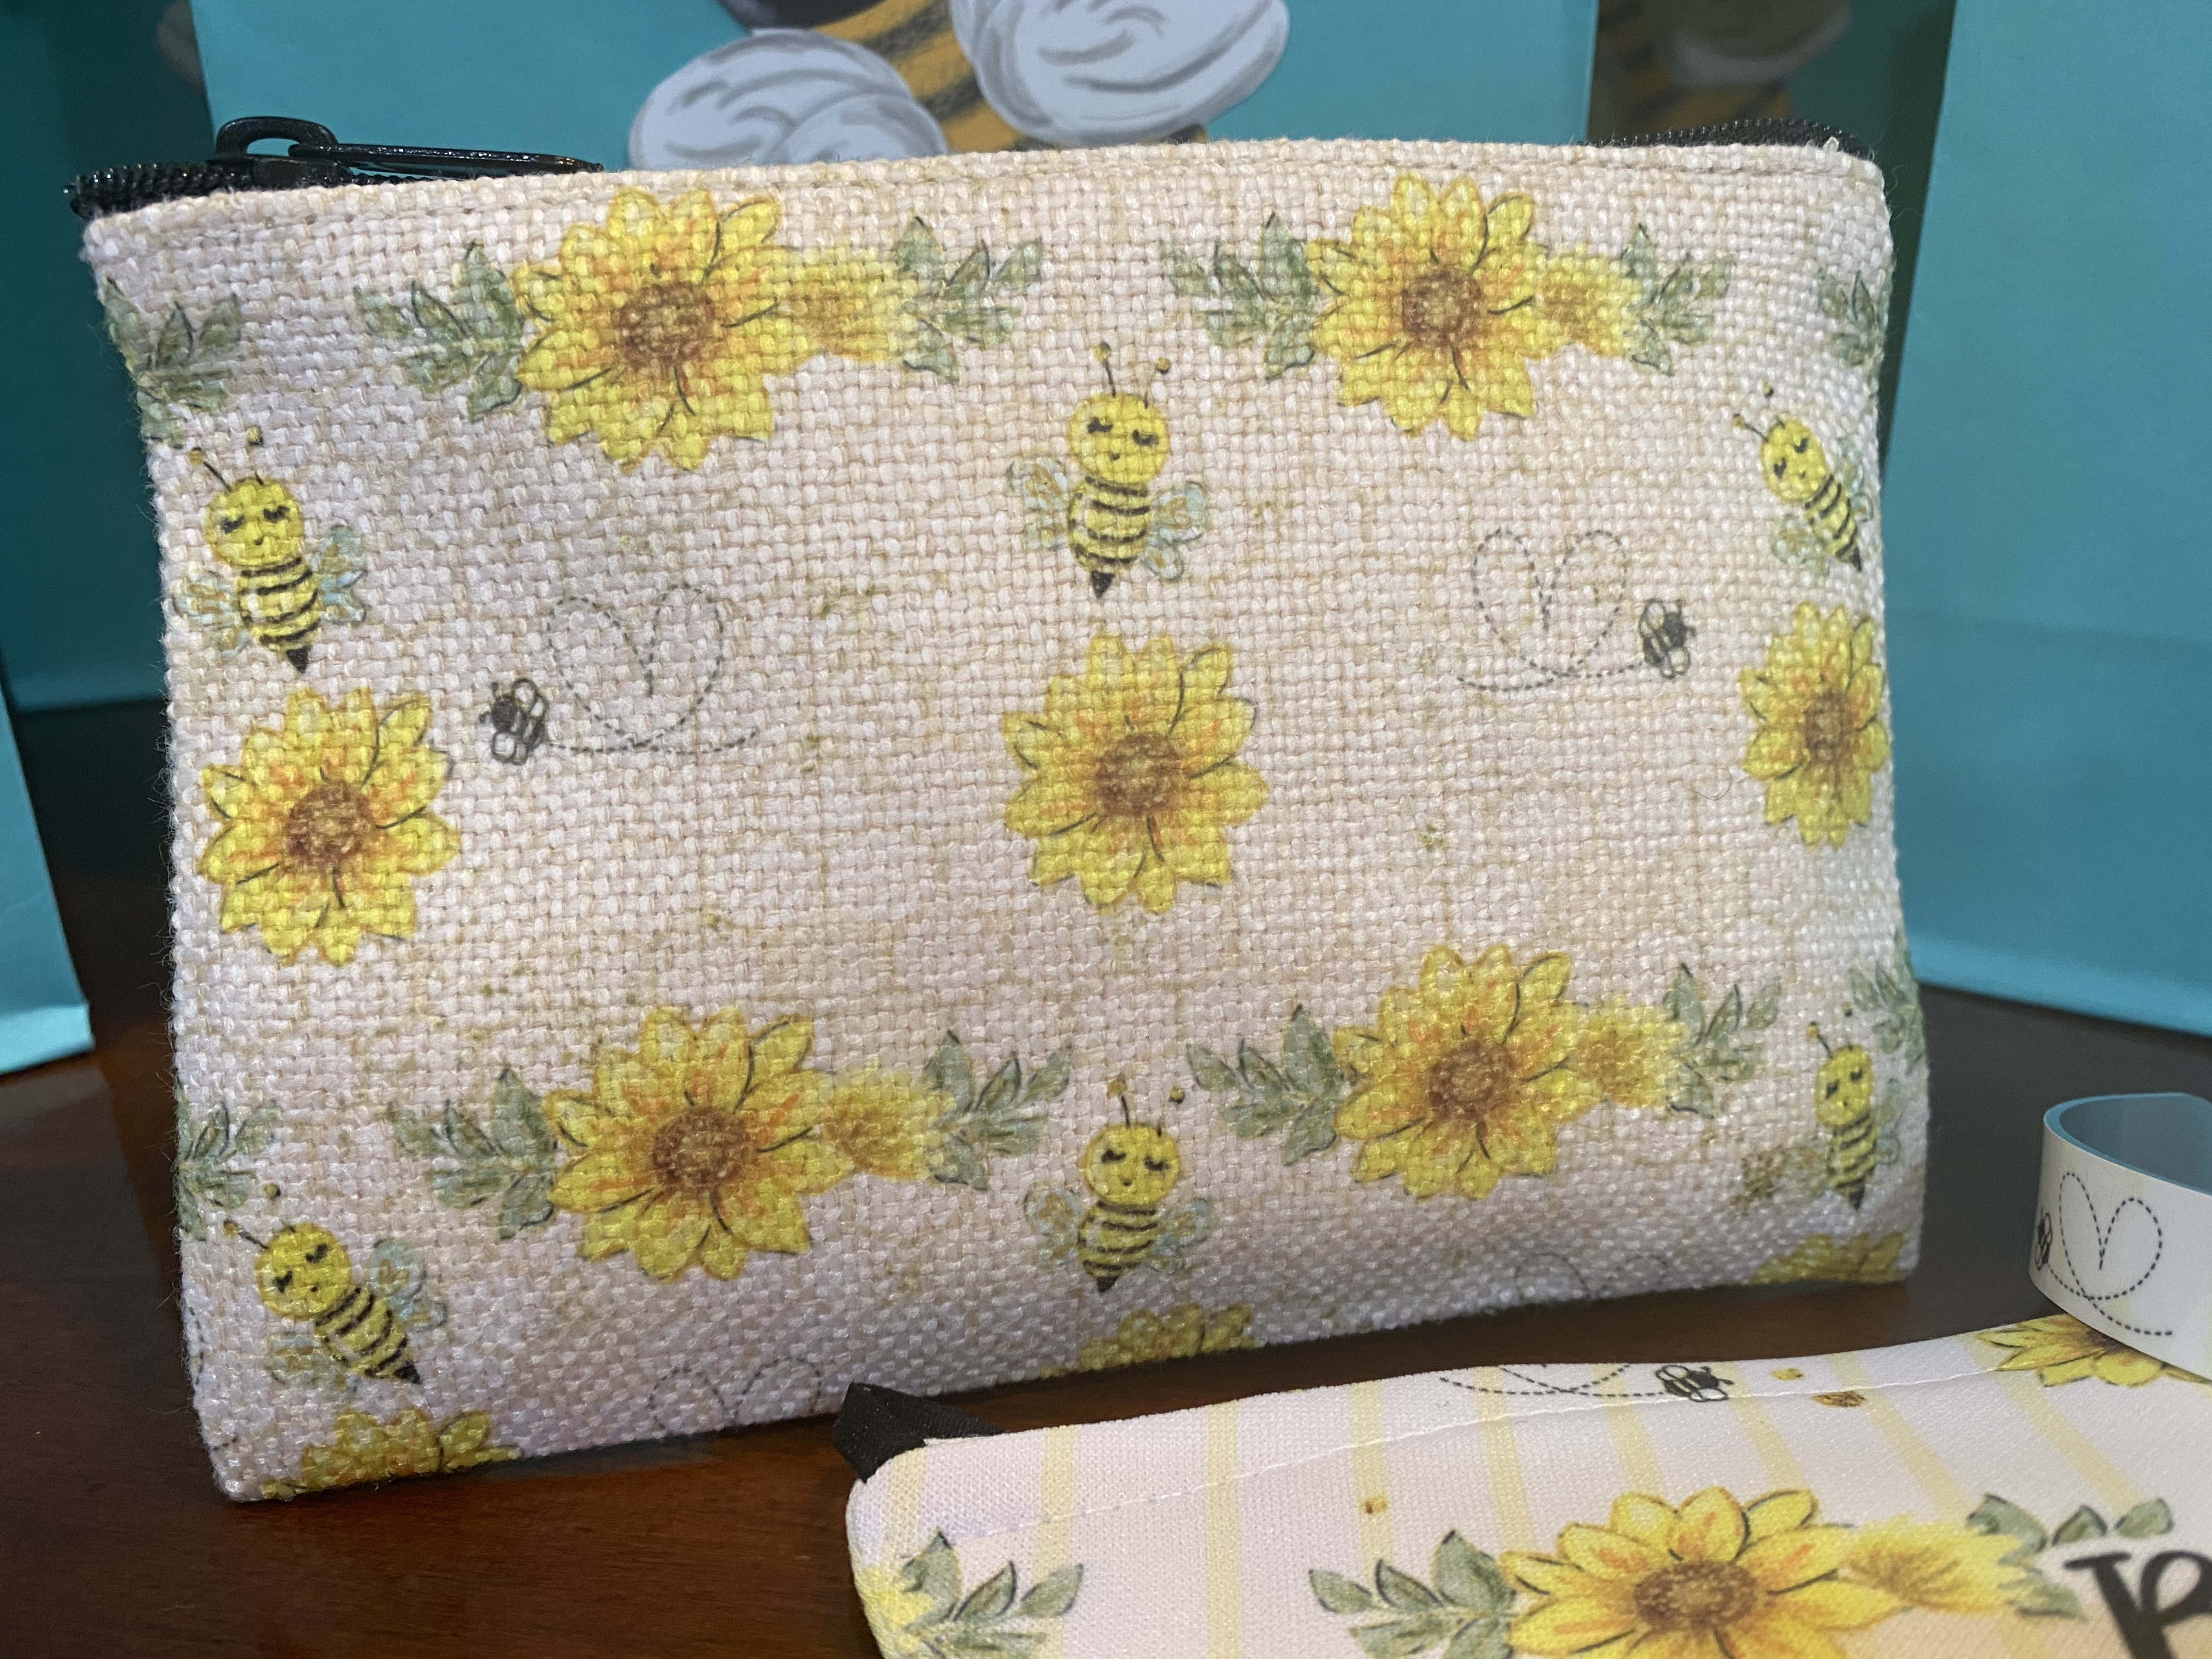 This makeup bag was given as gifts to our table at a local charity event for children. The them